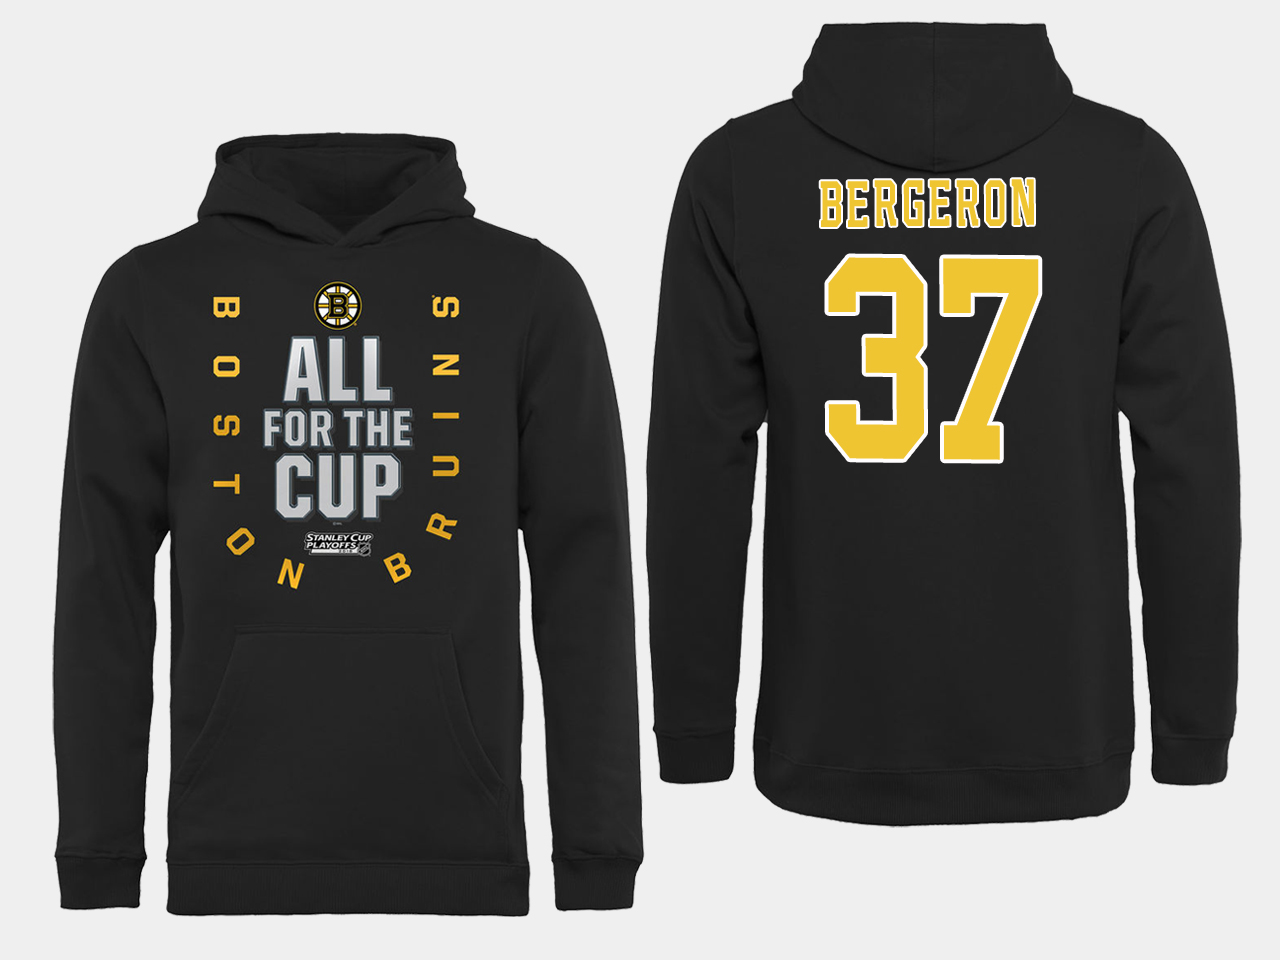 NHL Men Boston Bruins #37 Bergeron Black All for the Cup Hoodie->boston bruins->NHL Jersey